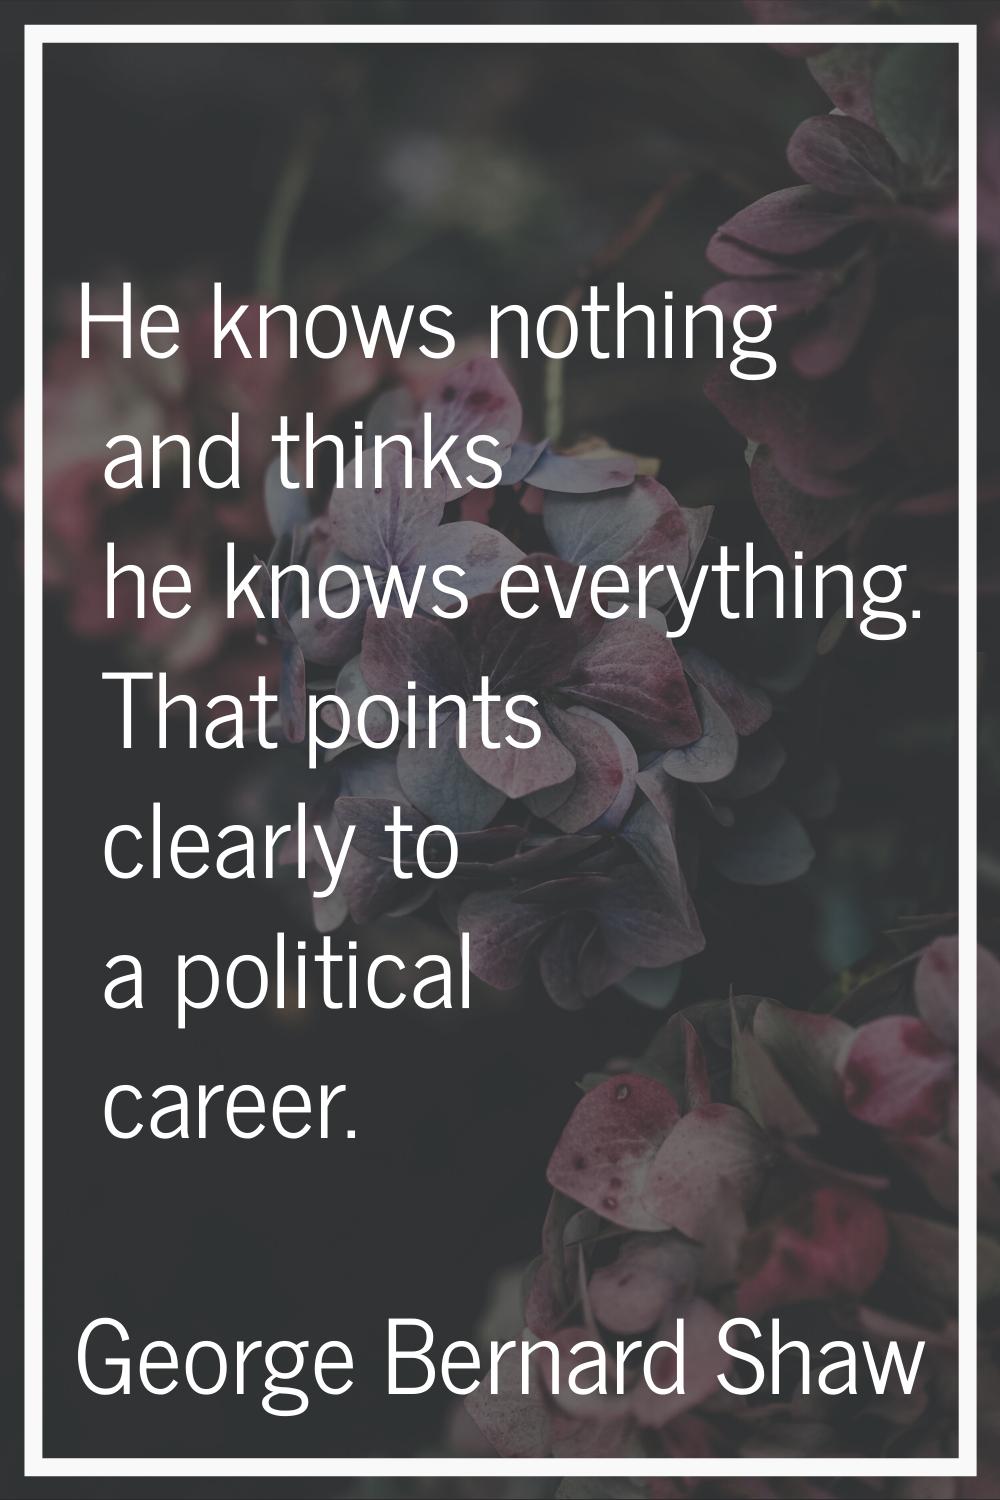 He knows nothing and thinks he knows everything. That points clearly to a political career.